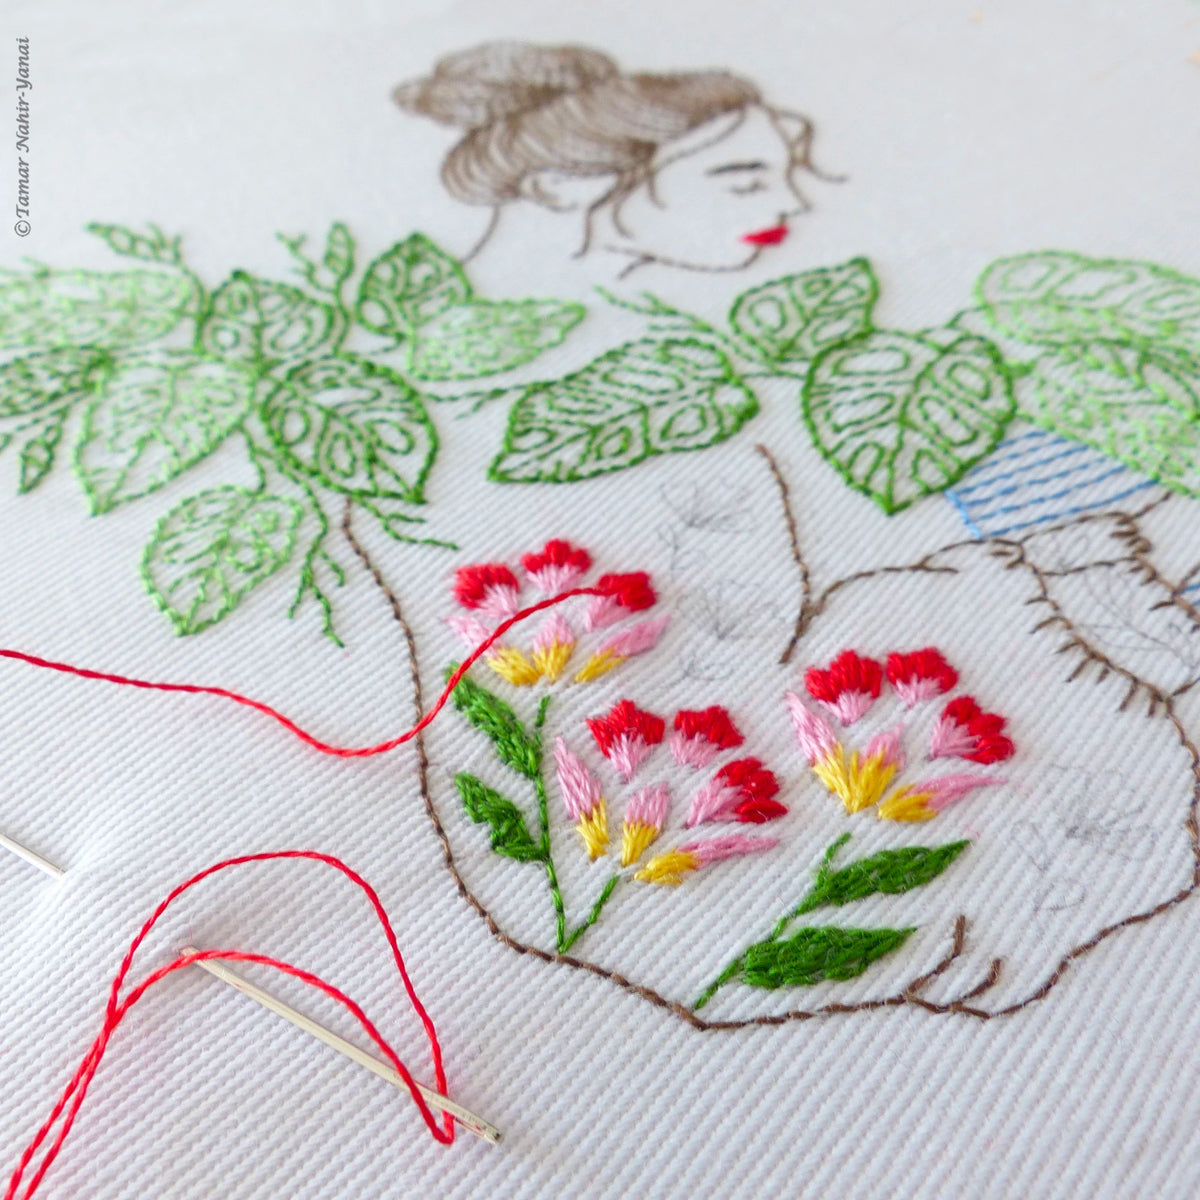 Monstera Lady Hand Embroidery Kit